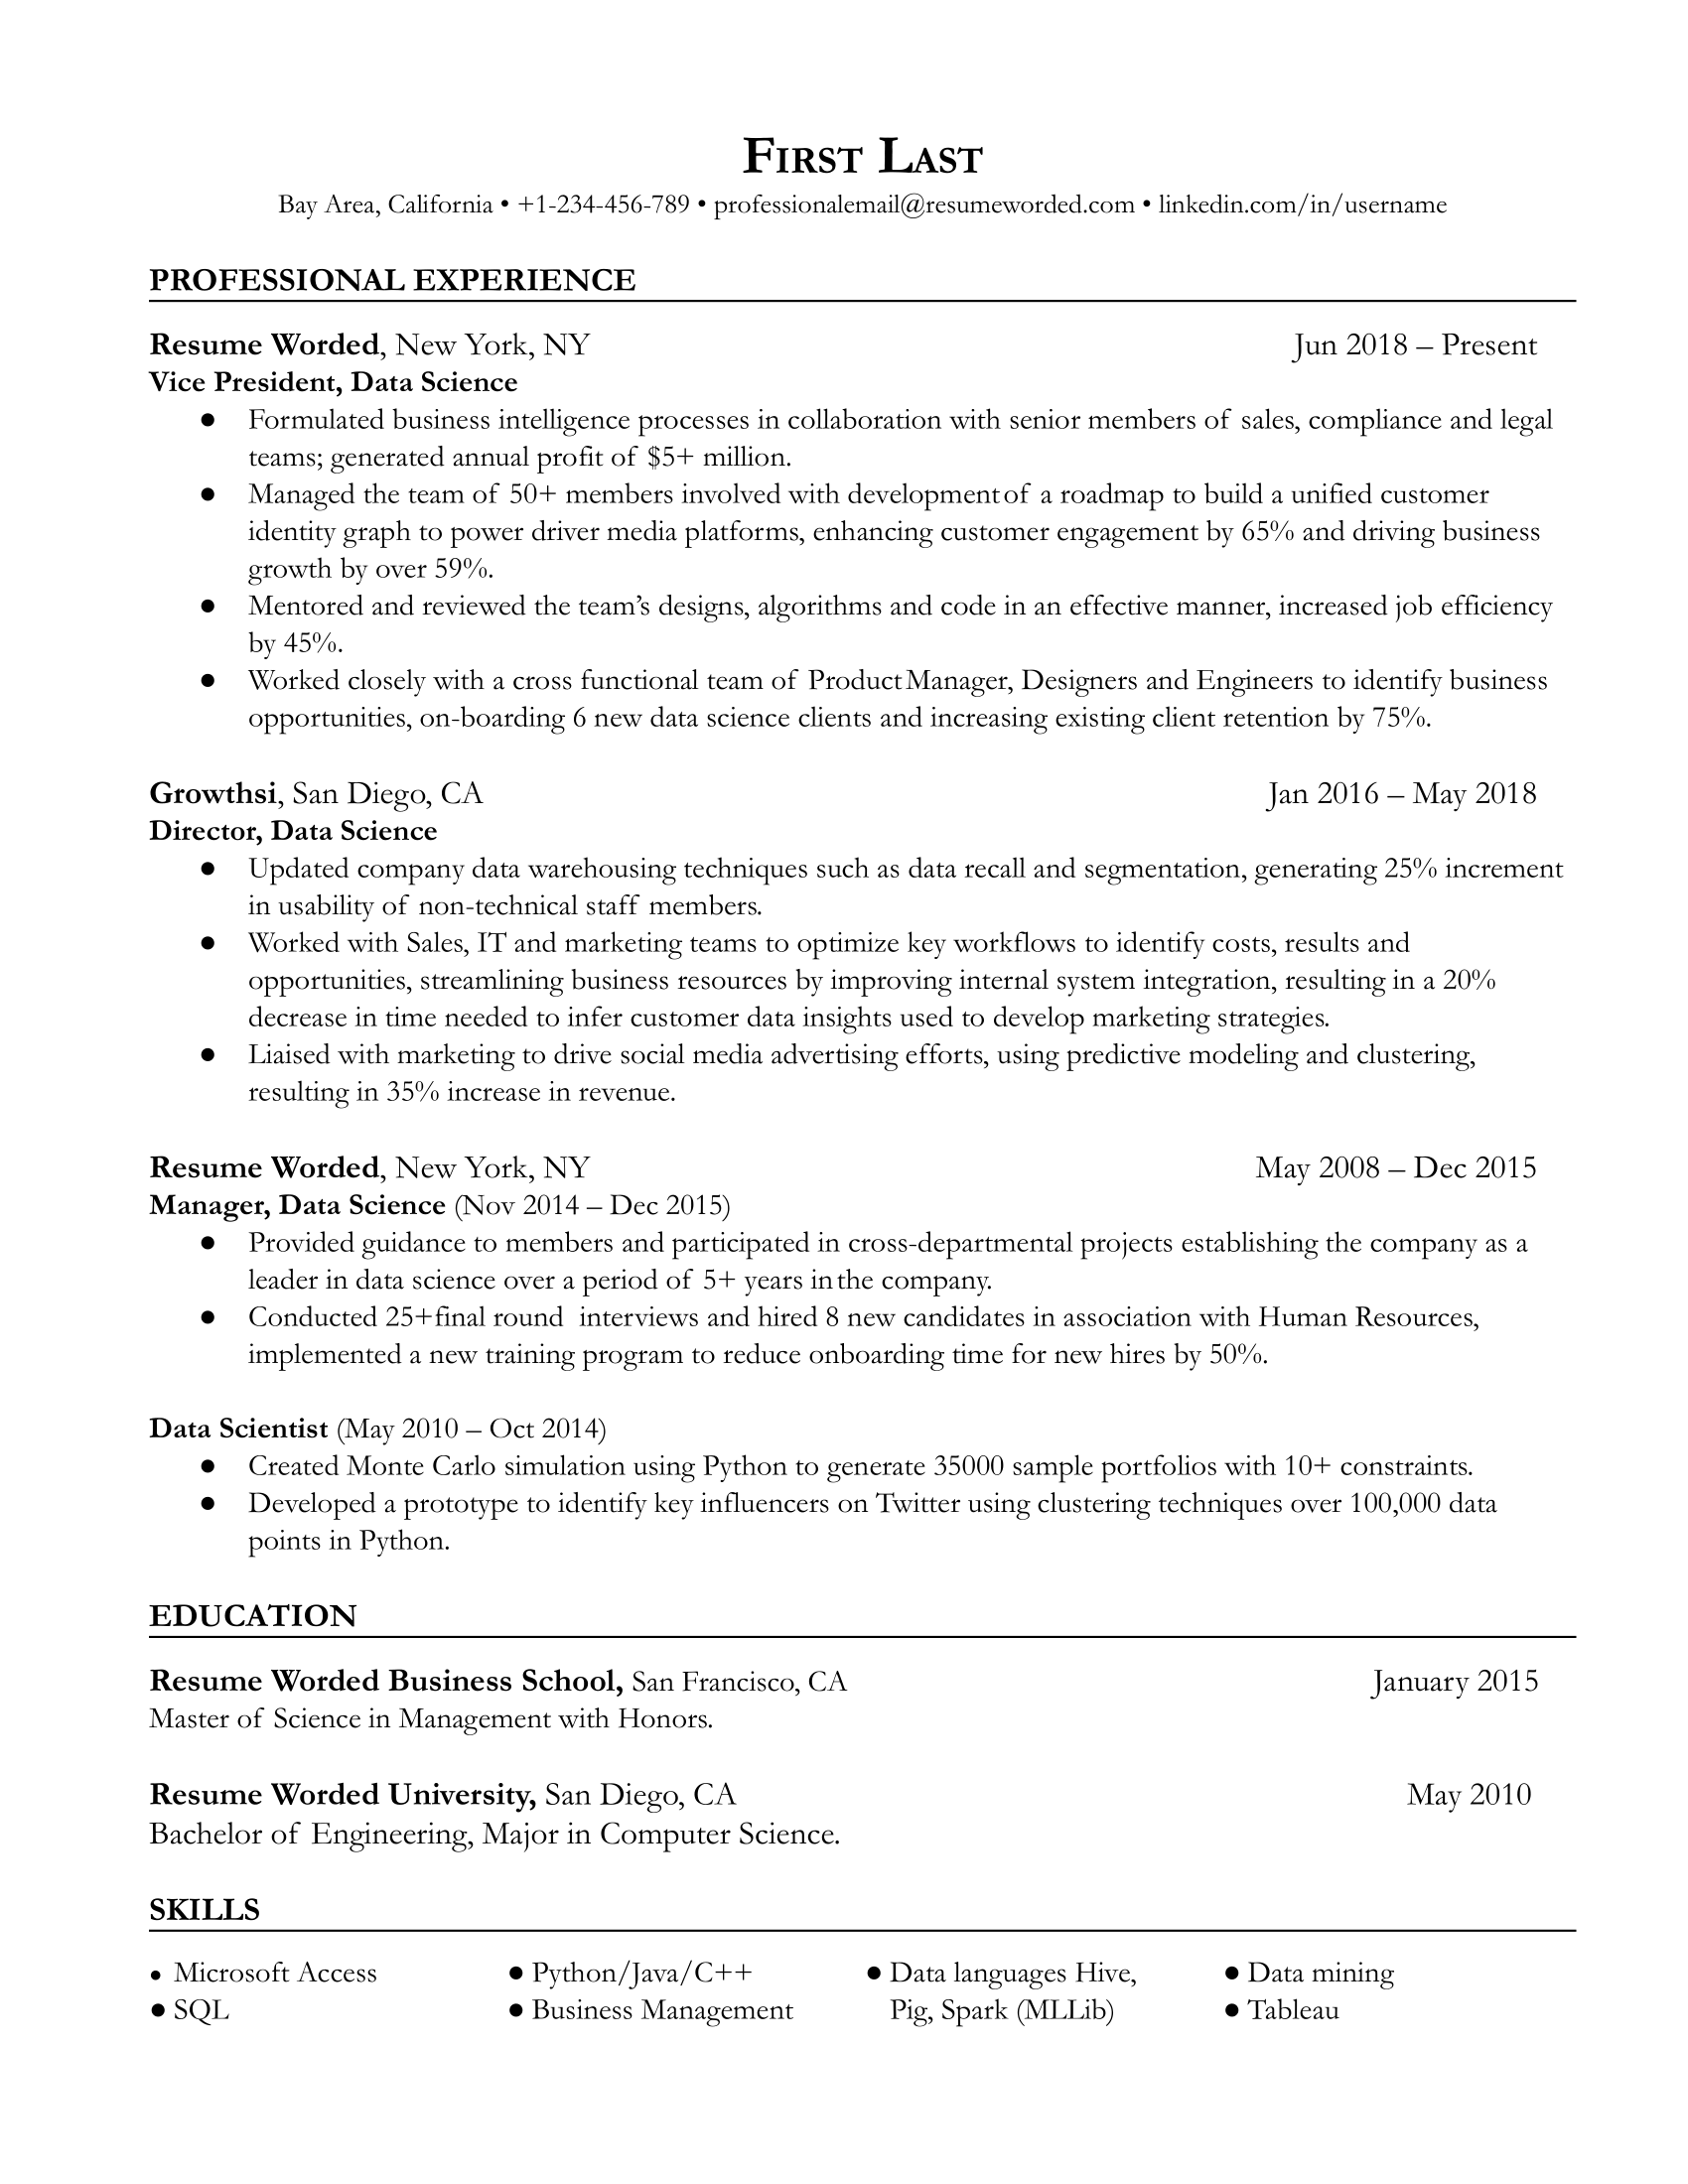 A concise CV for Data Science Vice President role highlighting strategic data-related accomplishments and leadership skills.